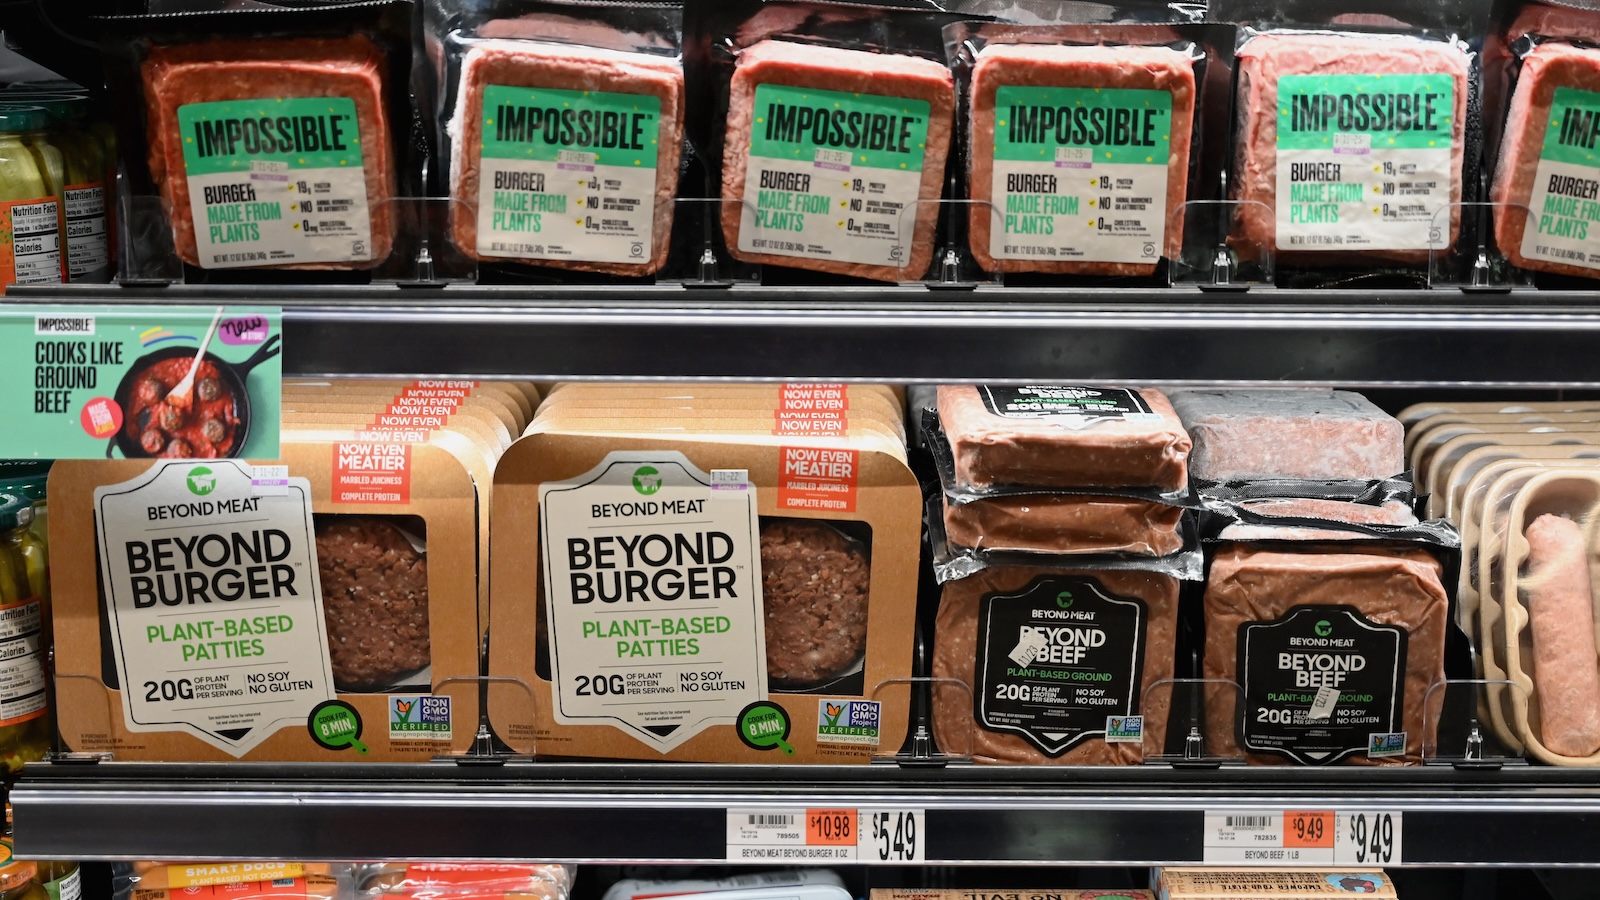 A straight-on view of packages of Beyond Meat and Impossible Burger products lining grocery store shelves